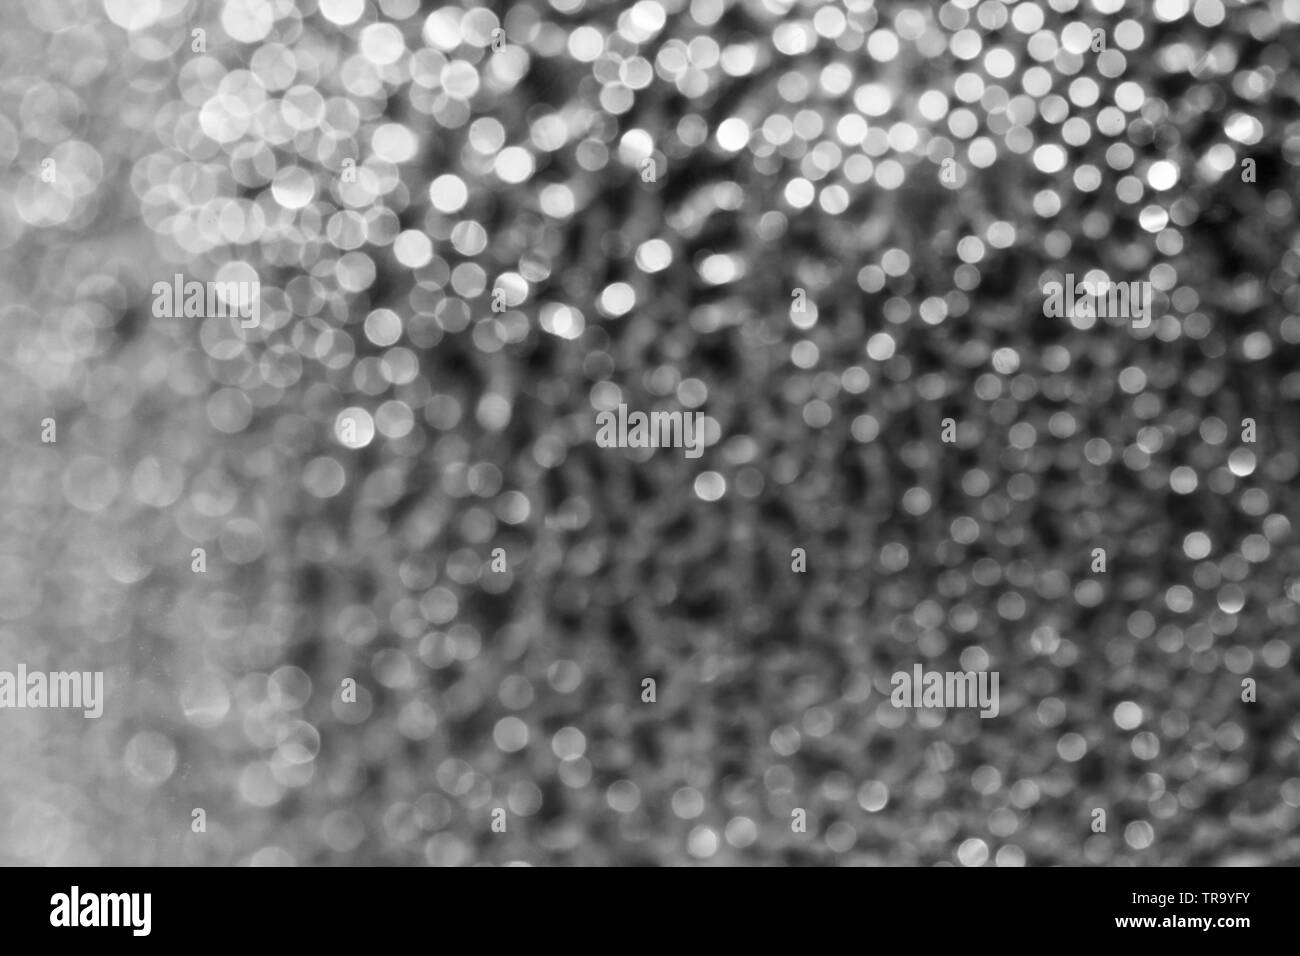 Blurred background of drops on the bottle wall. Blurred lights garland. Texture Stock Photo